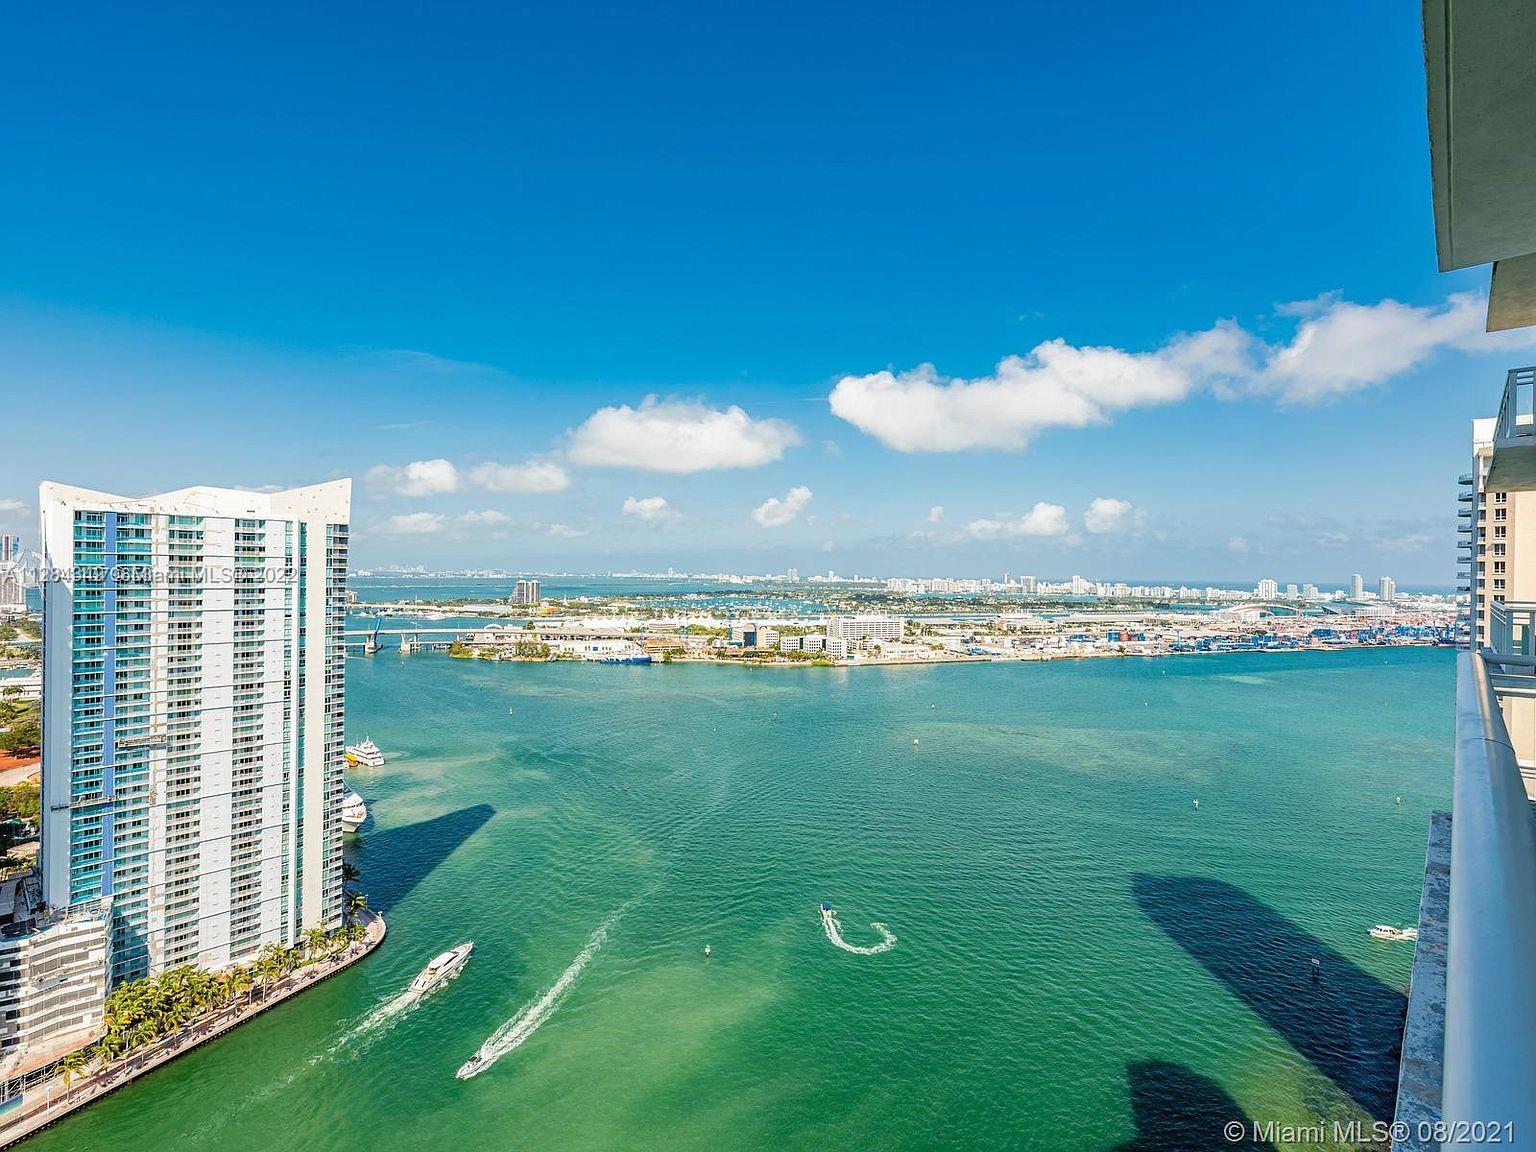 BEAUTIFUL 3 BR, 3.5 BATH CORNER UNIT IN ASIA, BRICKELL KEY'S MASTERPIECE WITH PRIVATE ELEVATOR AND 12' HIGH CEILINGS. ENJOY UNOBSTRUCTED BAY & OCEAN VIEWS, ALSO MIAMI RIVER AND MIAMI DOWNTOWN'S SKYLINE BREATHTAKING VIEWS. PERFECT WHITE TASSO FLOORS THROUGHOUT. DESIGNER CLOSETS. LUXURY MIELE KITCHEN & APPLIANCES. SMART BUILDING W/OUTSTANDING AMENITIES. PRIVATE ELEVATOR, STATE OF THE ART GYM, 24 HR CONCIERGE AND VALET. VERY EXCLUSIVE ONLY 122 UNITS IN THE BUILDING.